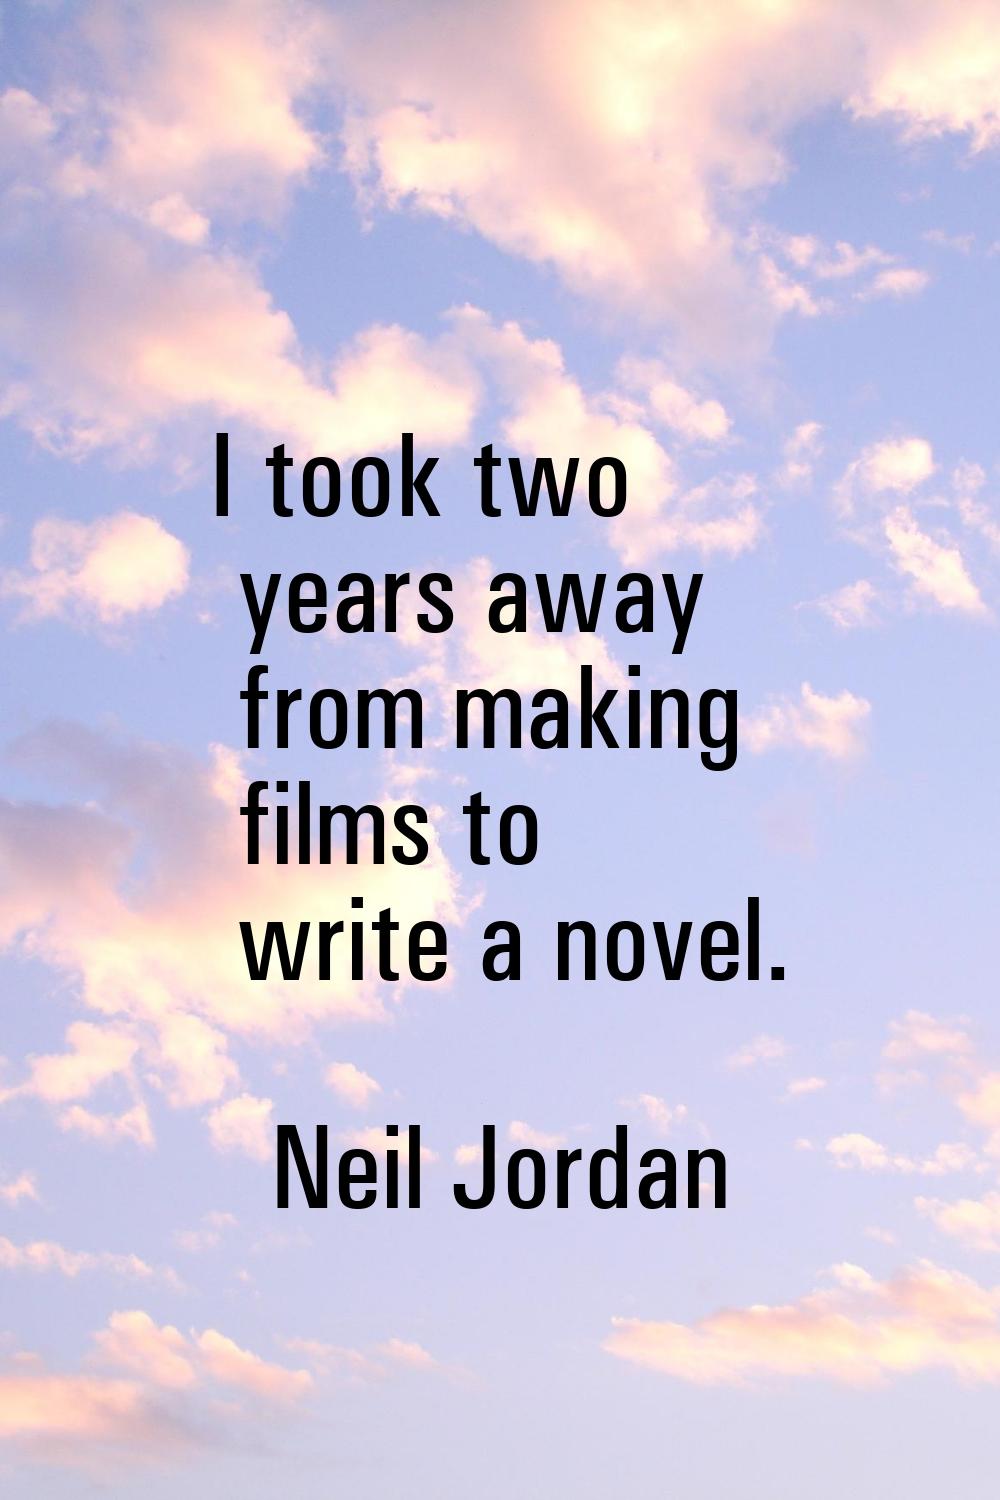 I took two years away from making films to write a novel.